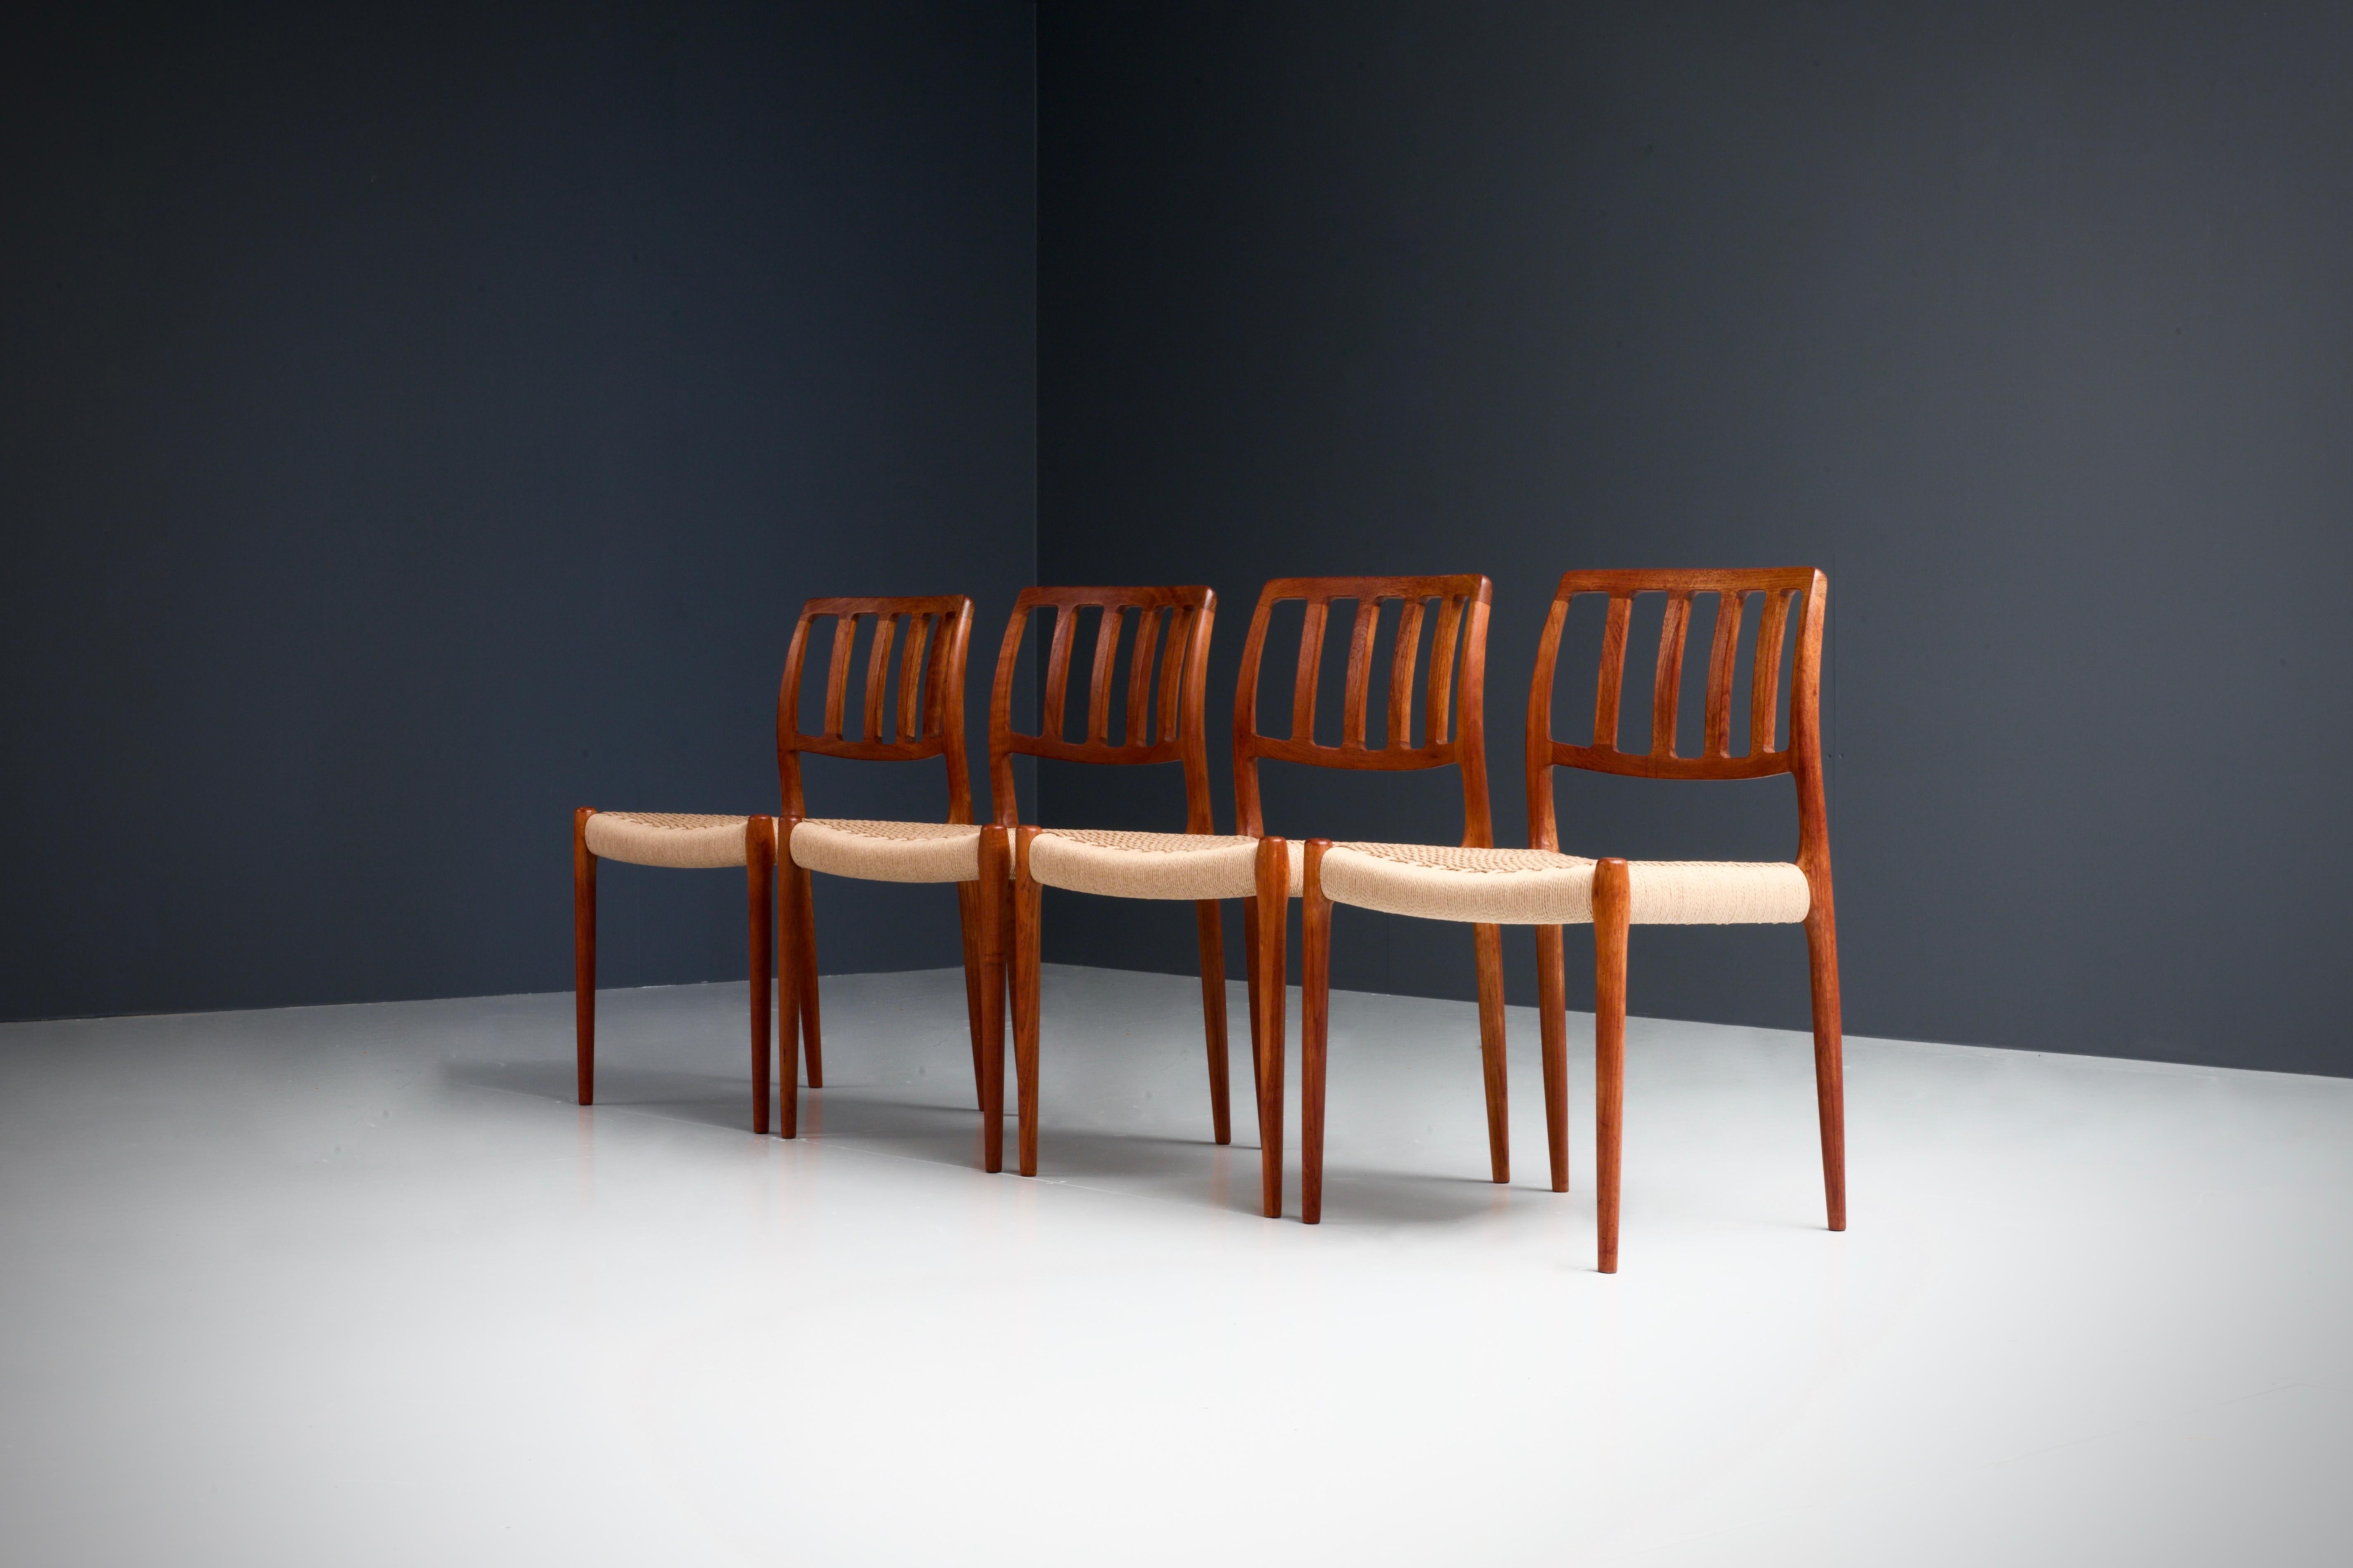 Set of four dining chairs by Niels Otto Møller in newly upholstered Danish Cord, Denmark, 1960s

Perfect condition and newly upholstered: this is the set you are looking for if you need some fresh Danish forms and shapes in your house. The teak